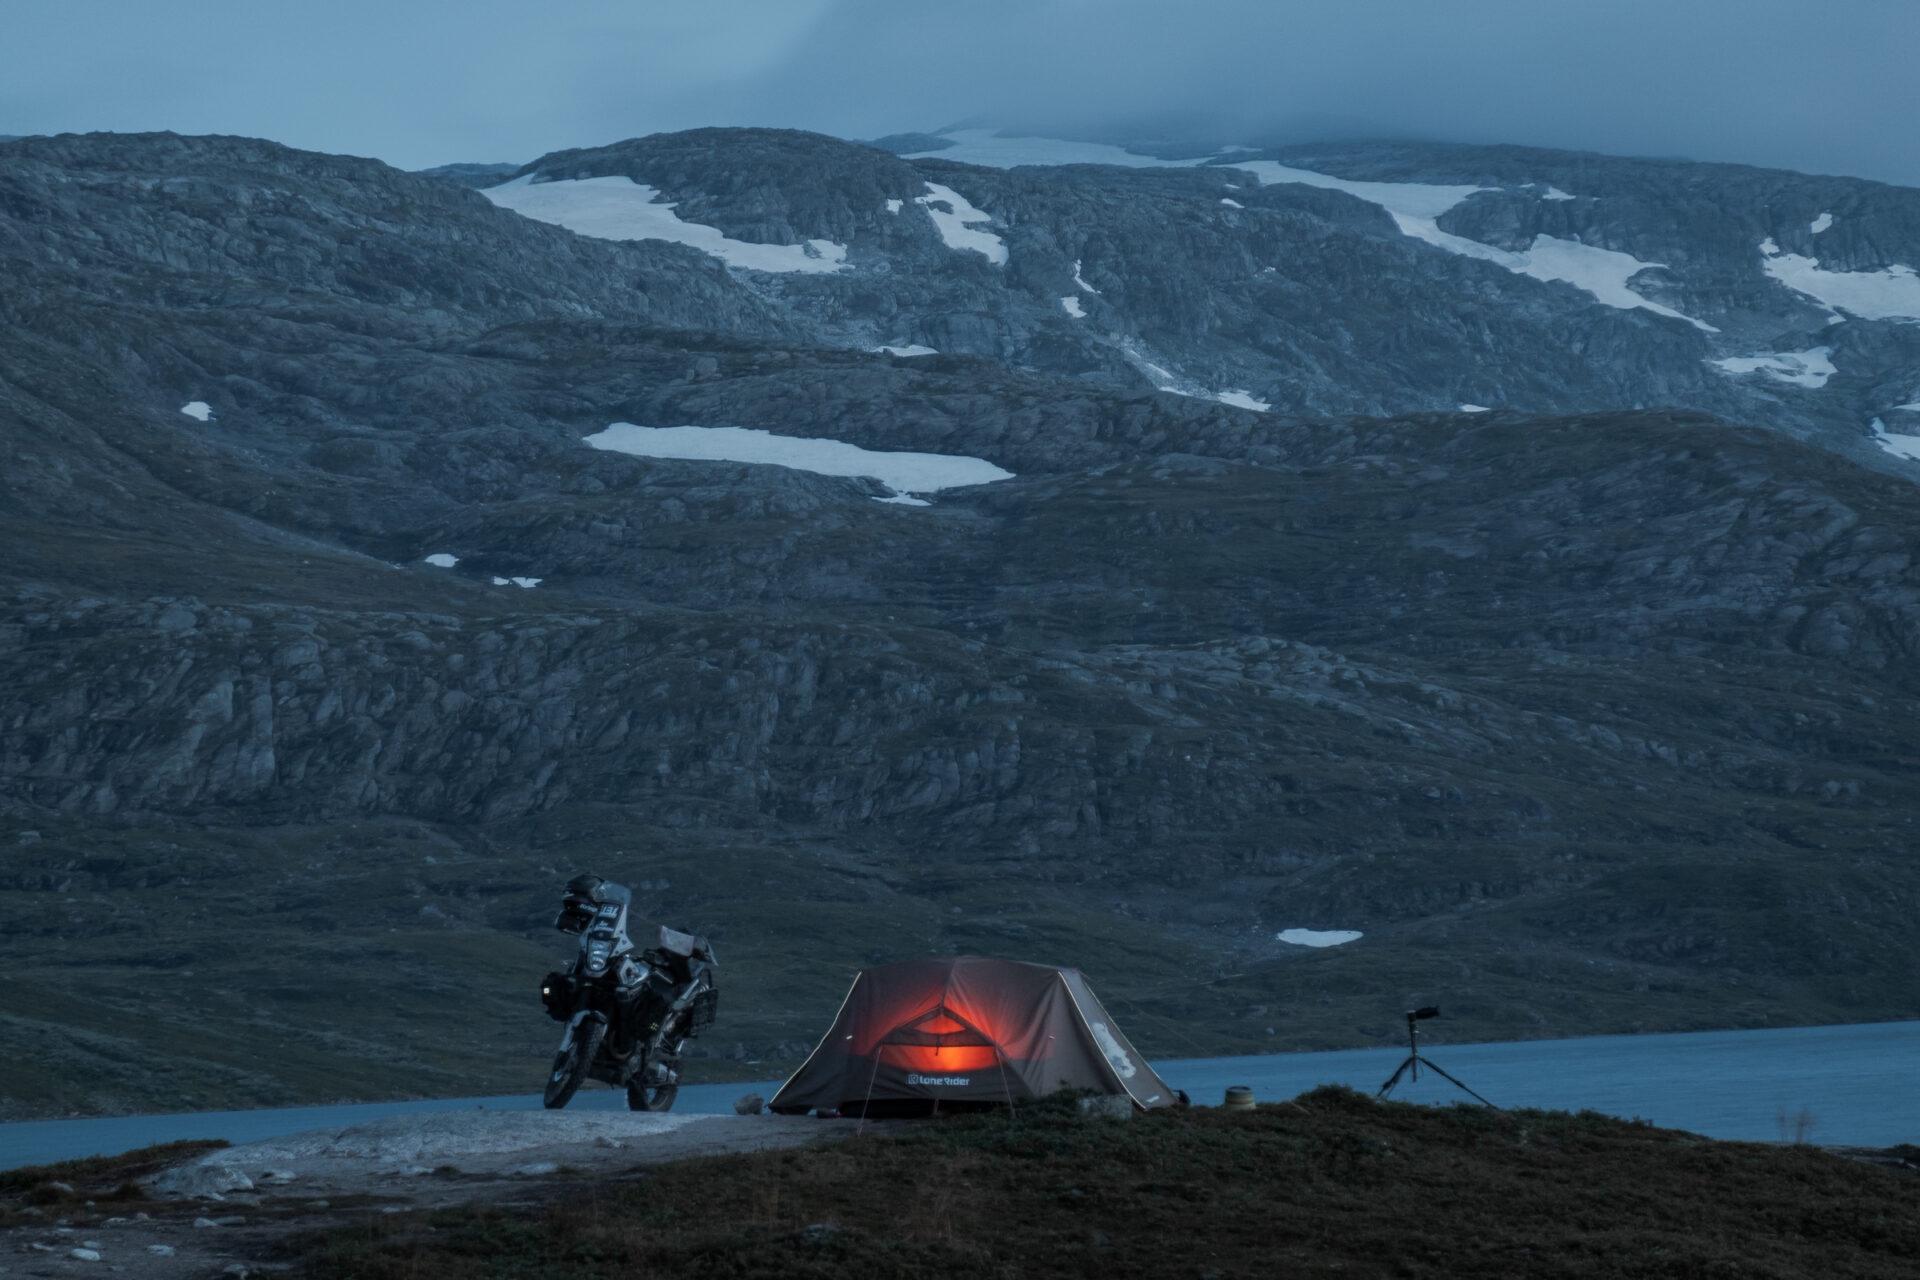 Wild camping in Norway